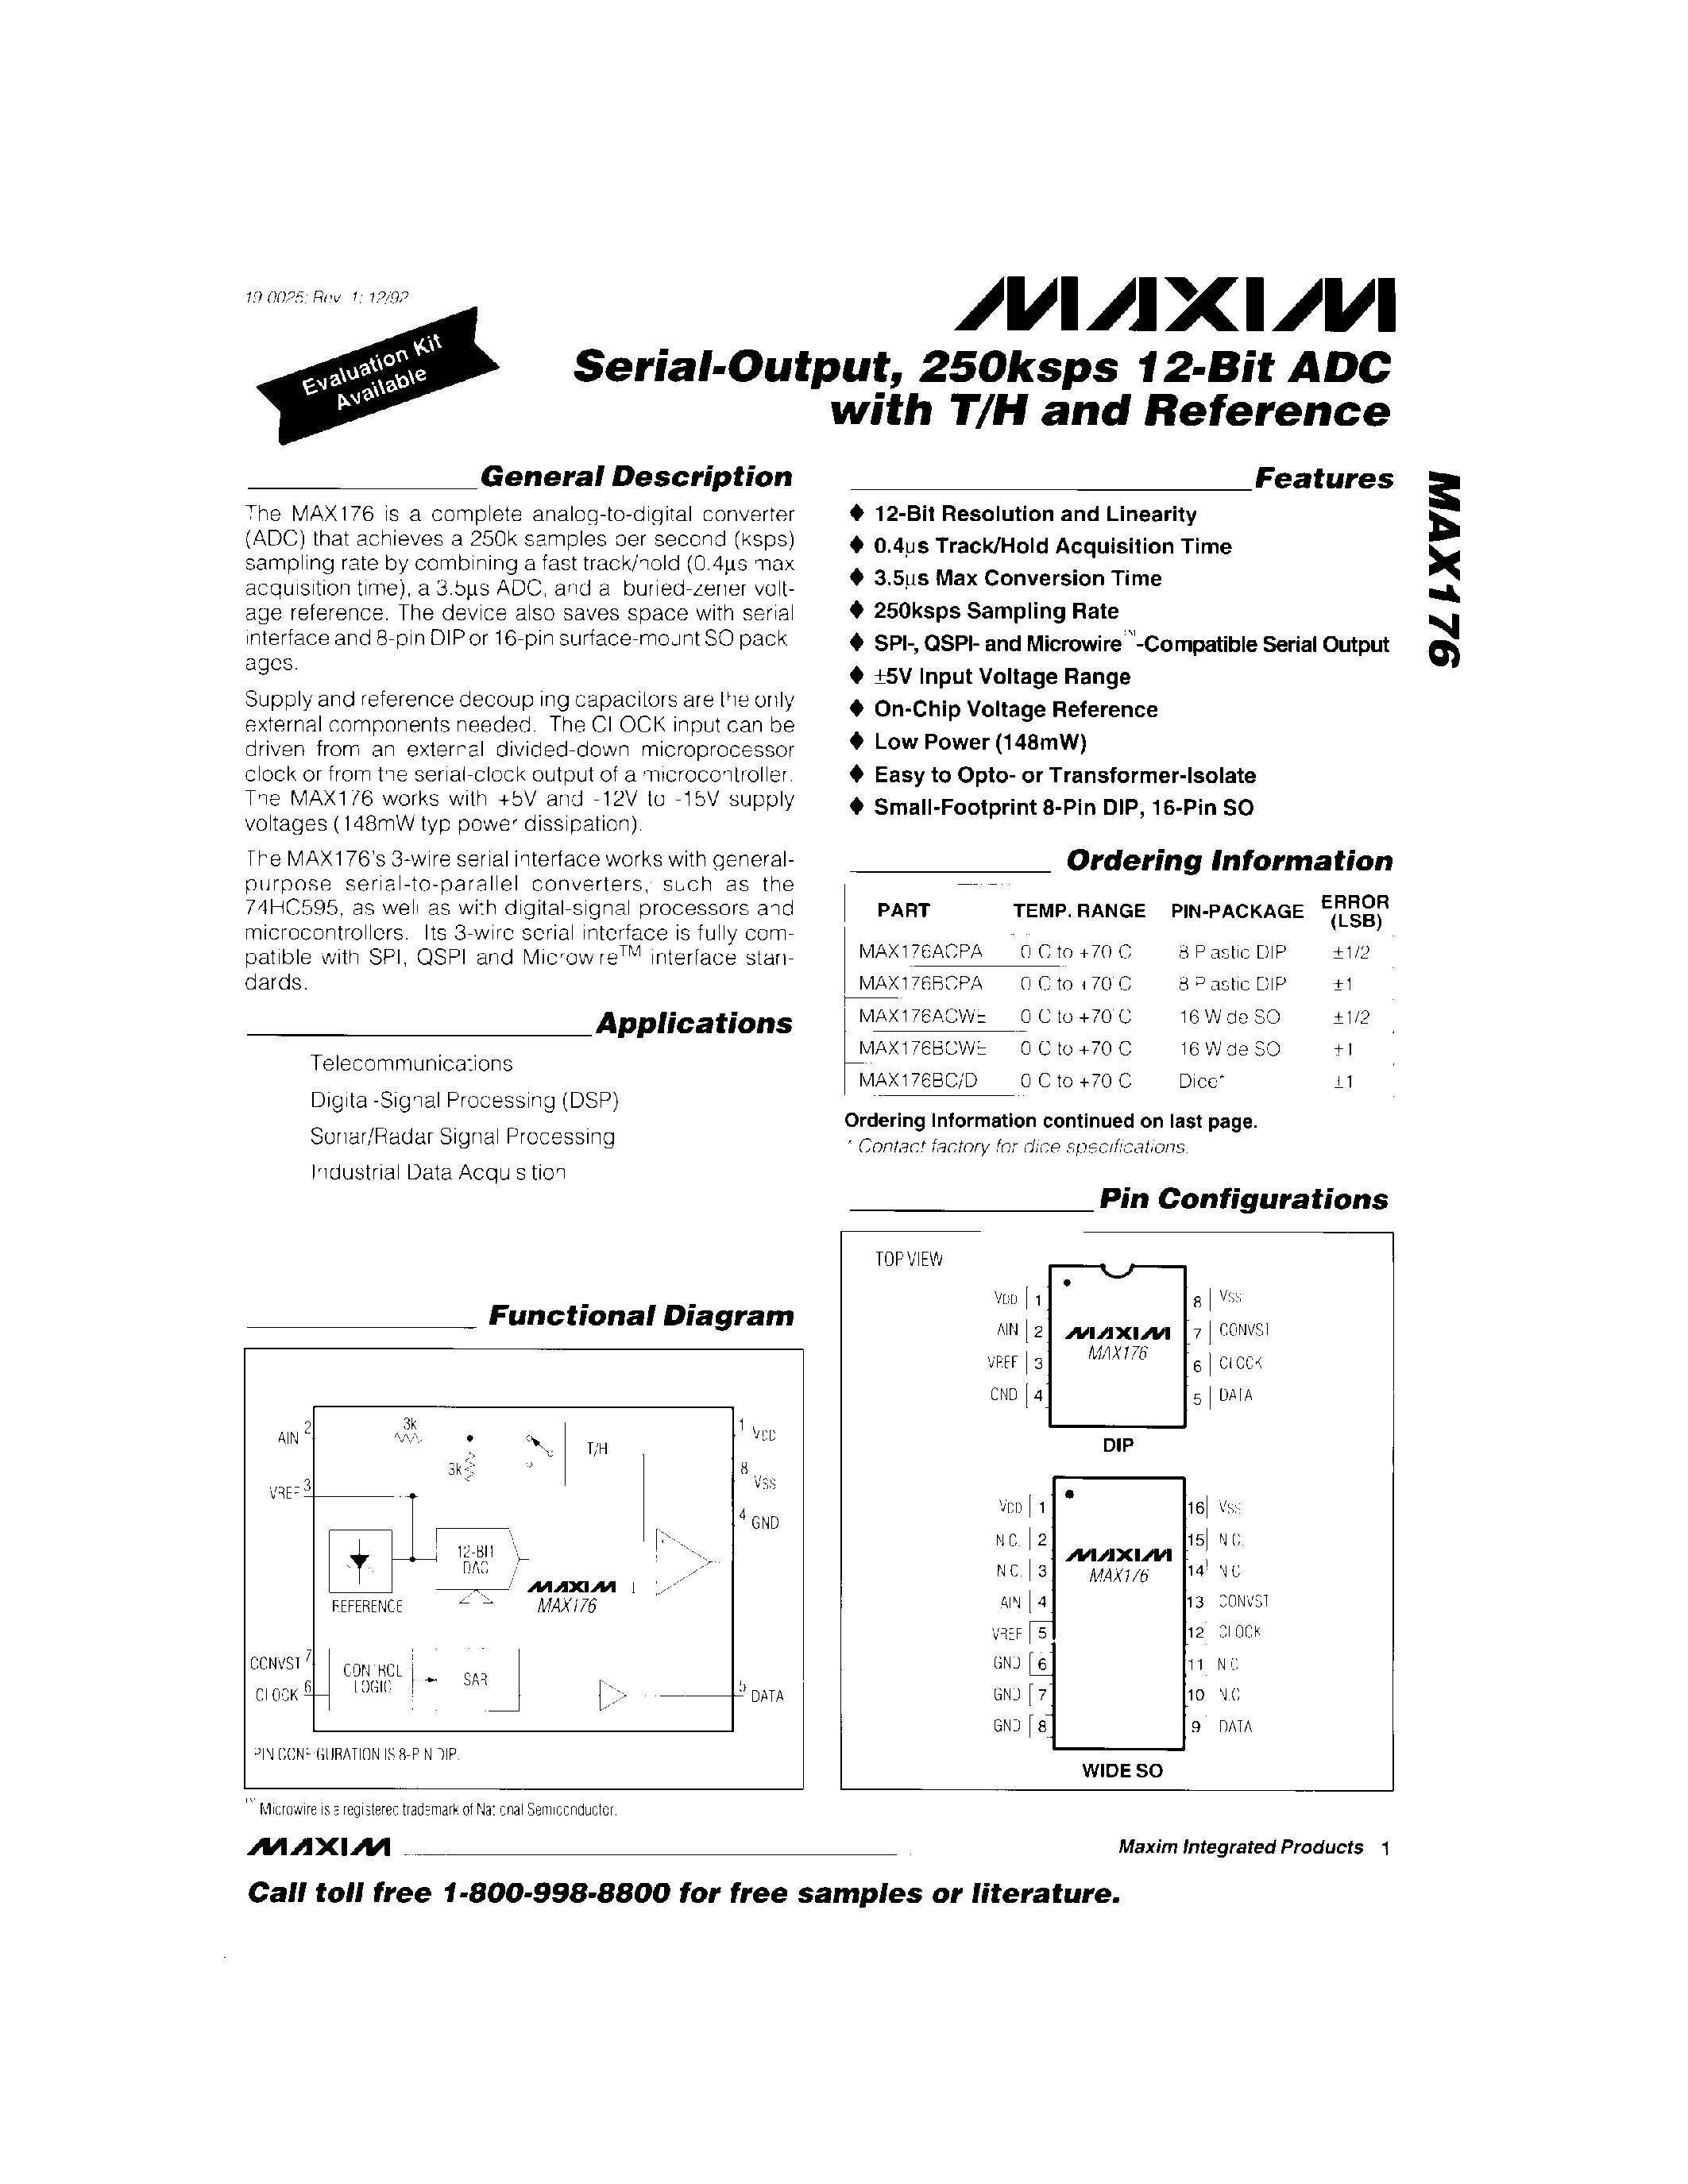 Даташит MAX176 - Serial-Output / 250Ksps 12-Bit ADC with T/H and Refernce страница 1